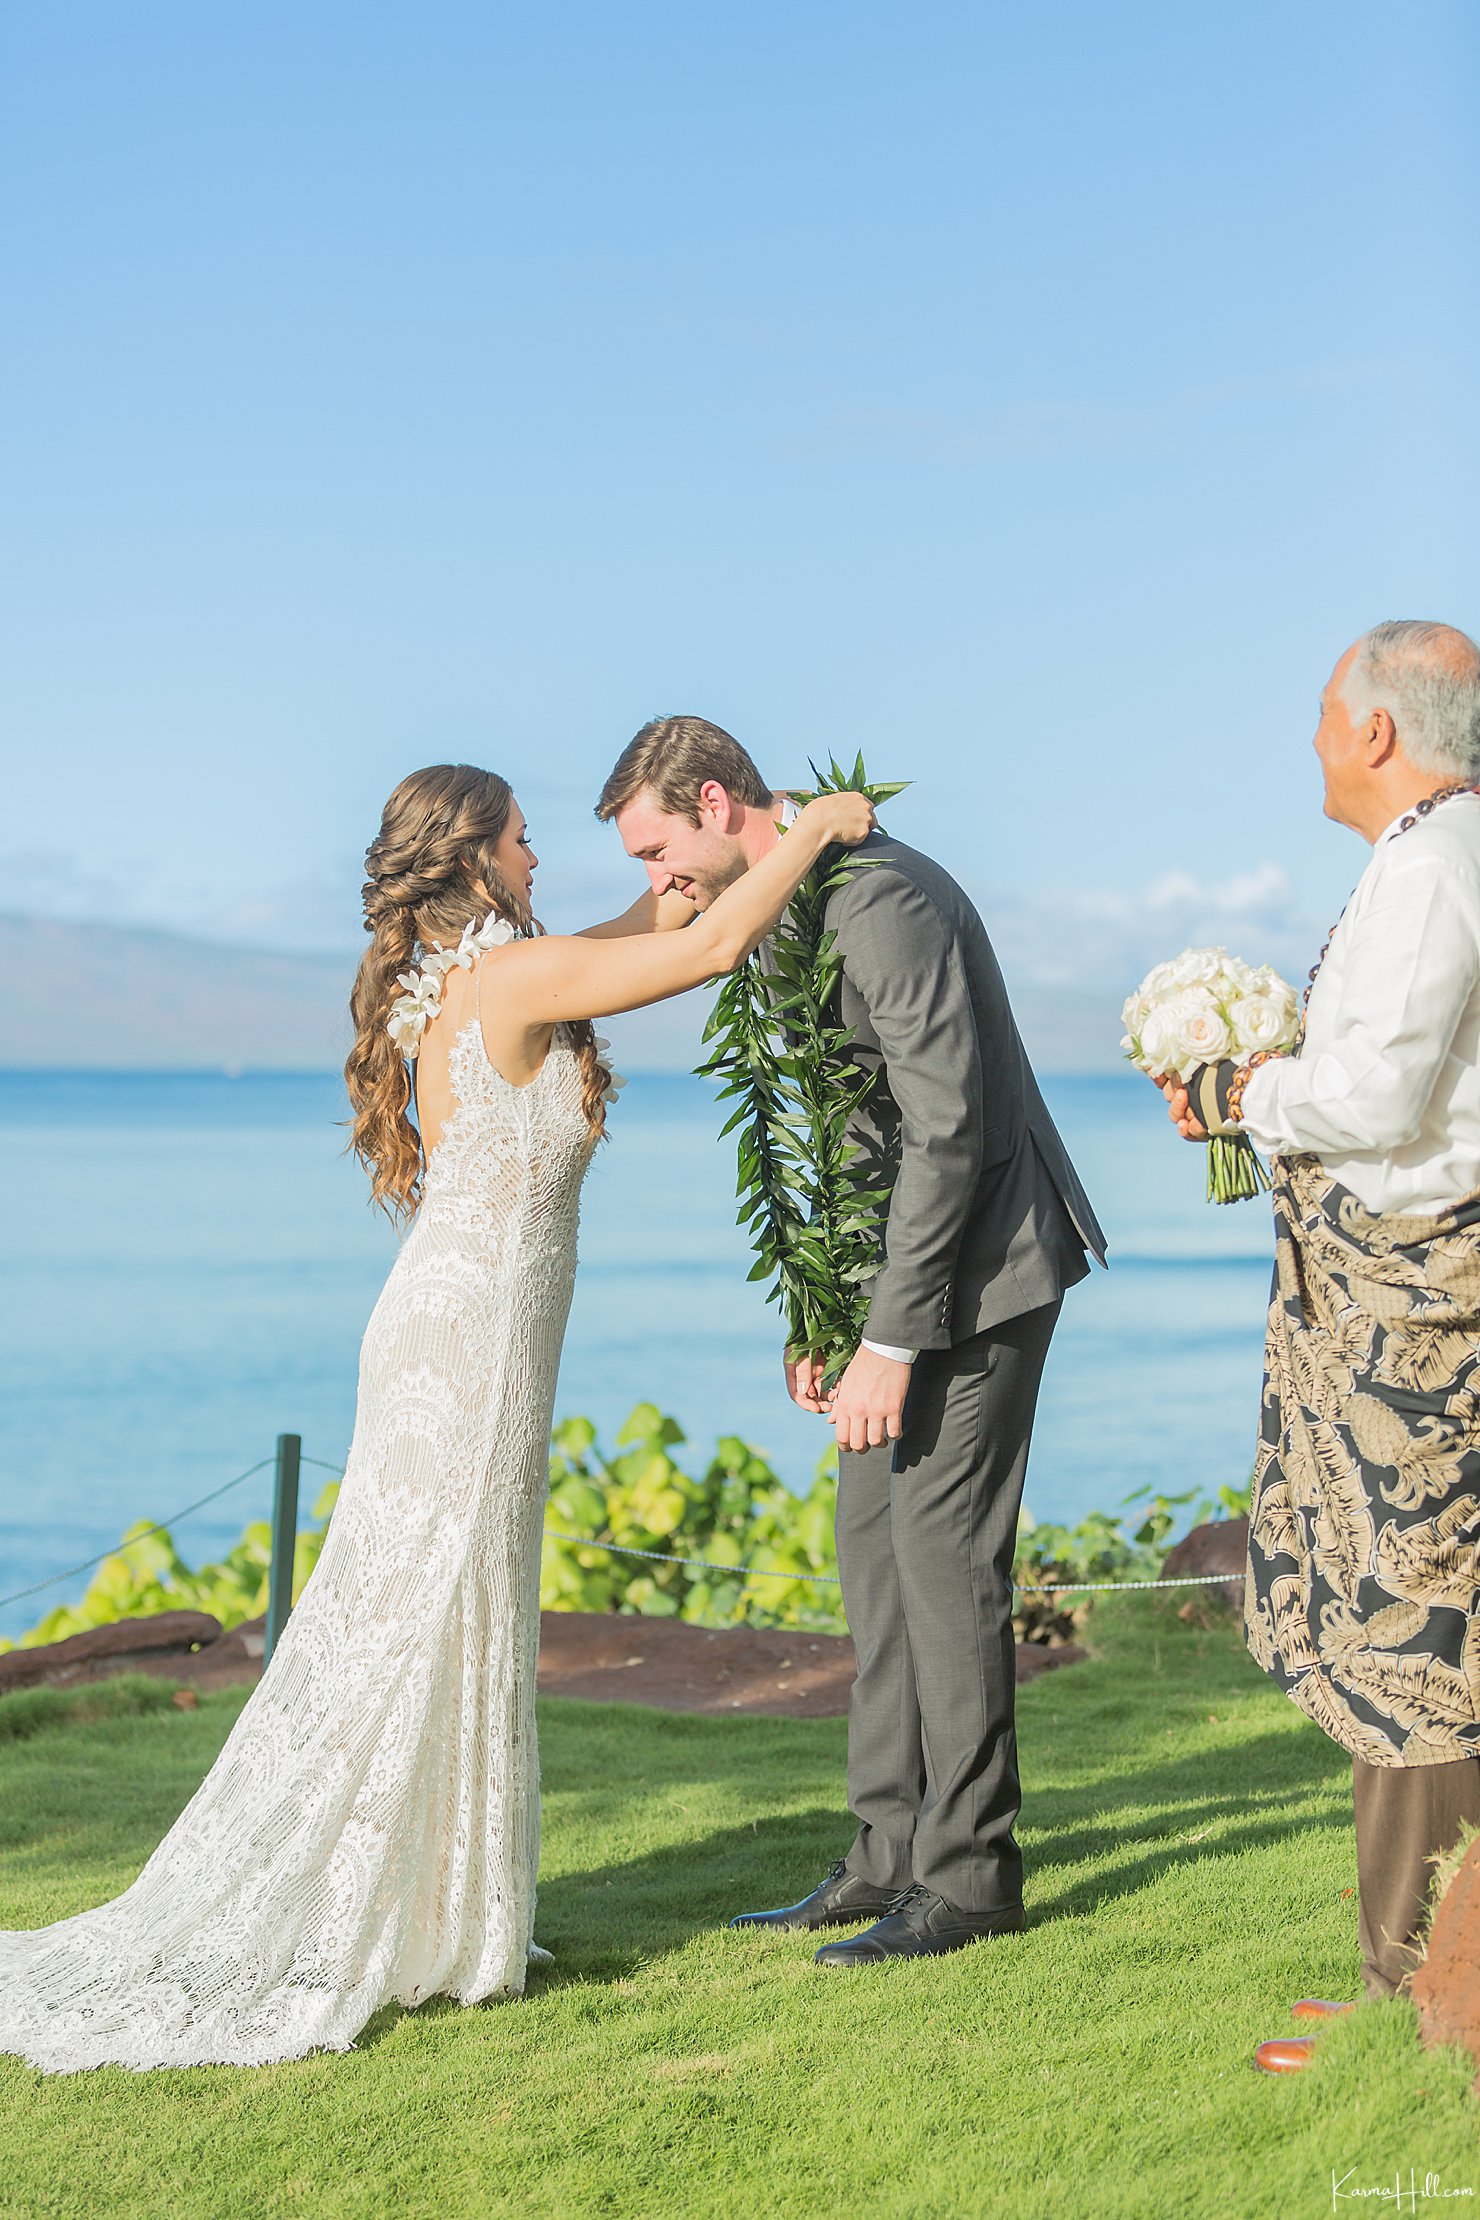 bride exchanging lei with groom at hawaii wedding